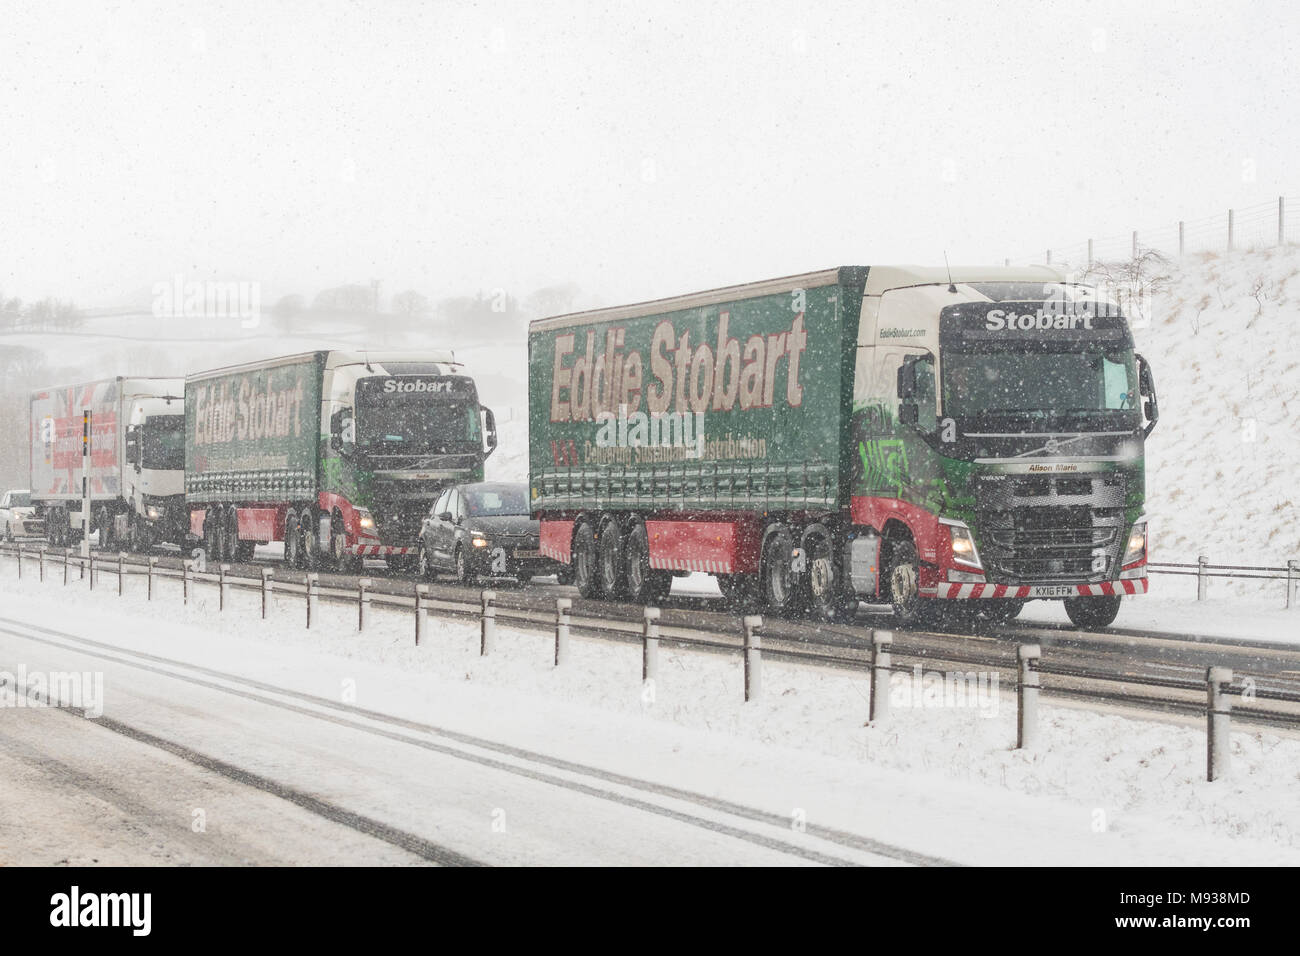 Eddie Stobart lorries stationary in snow on the A66, England, UK Stock Photo